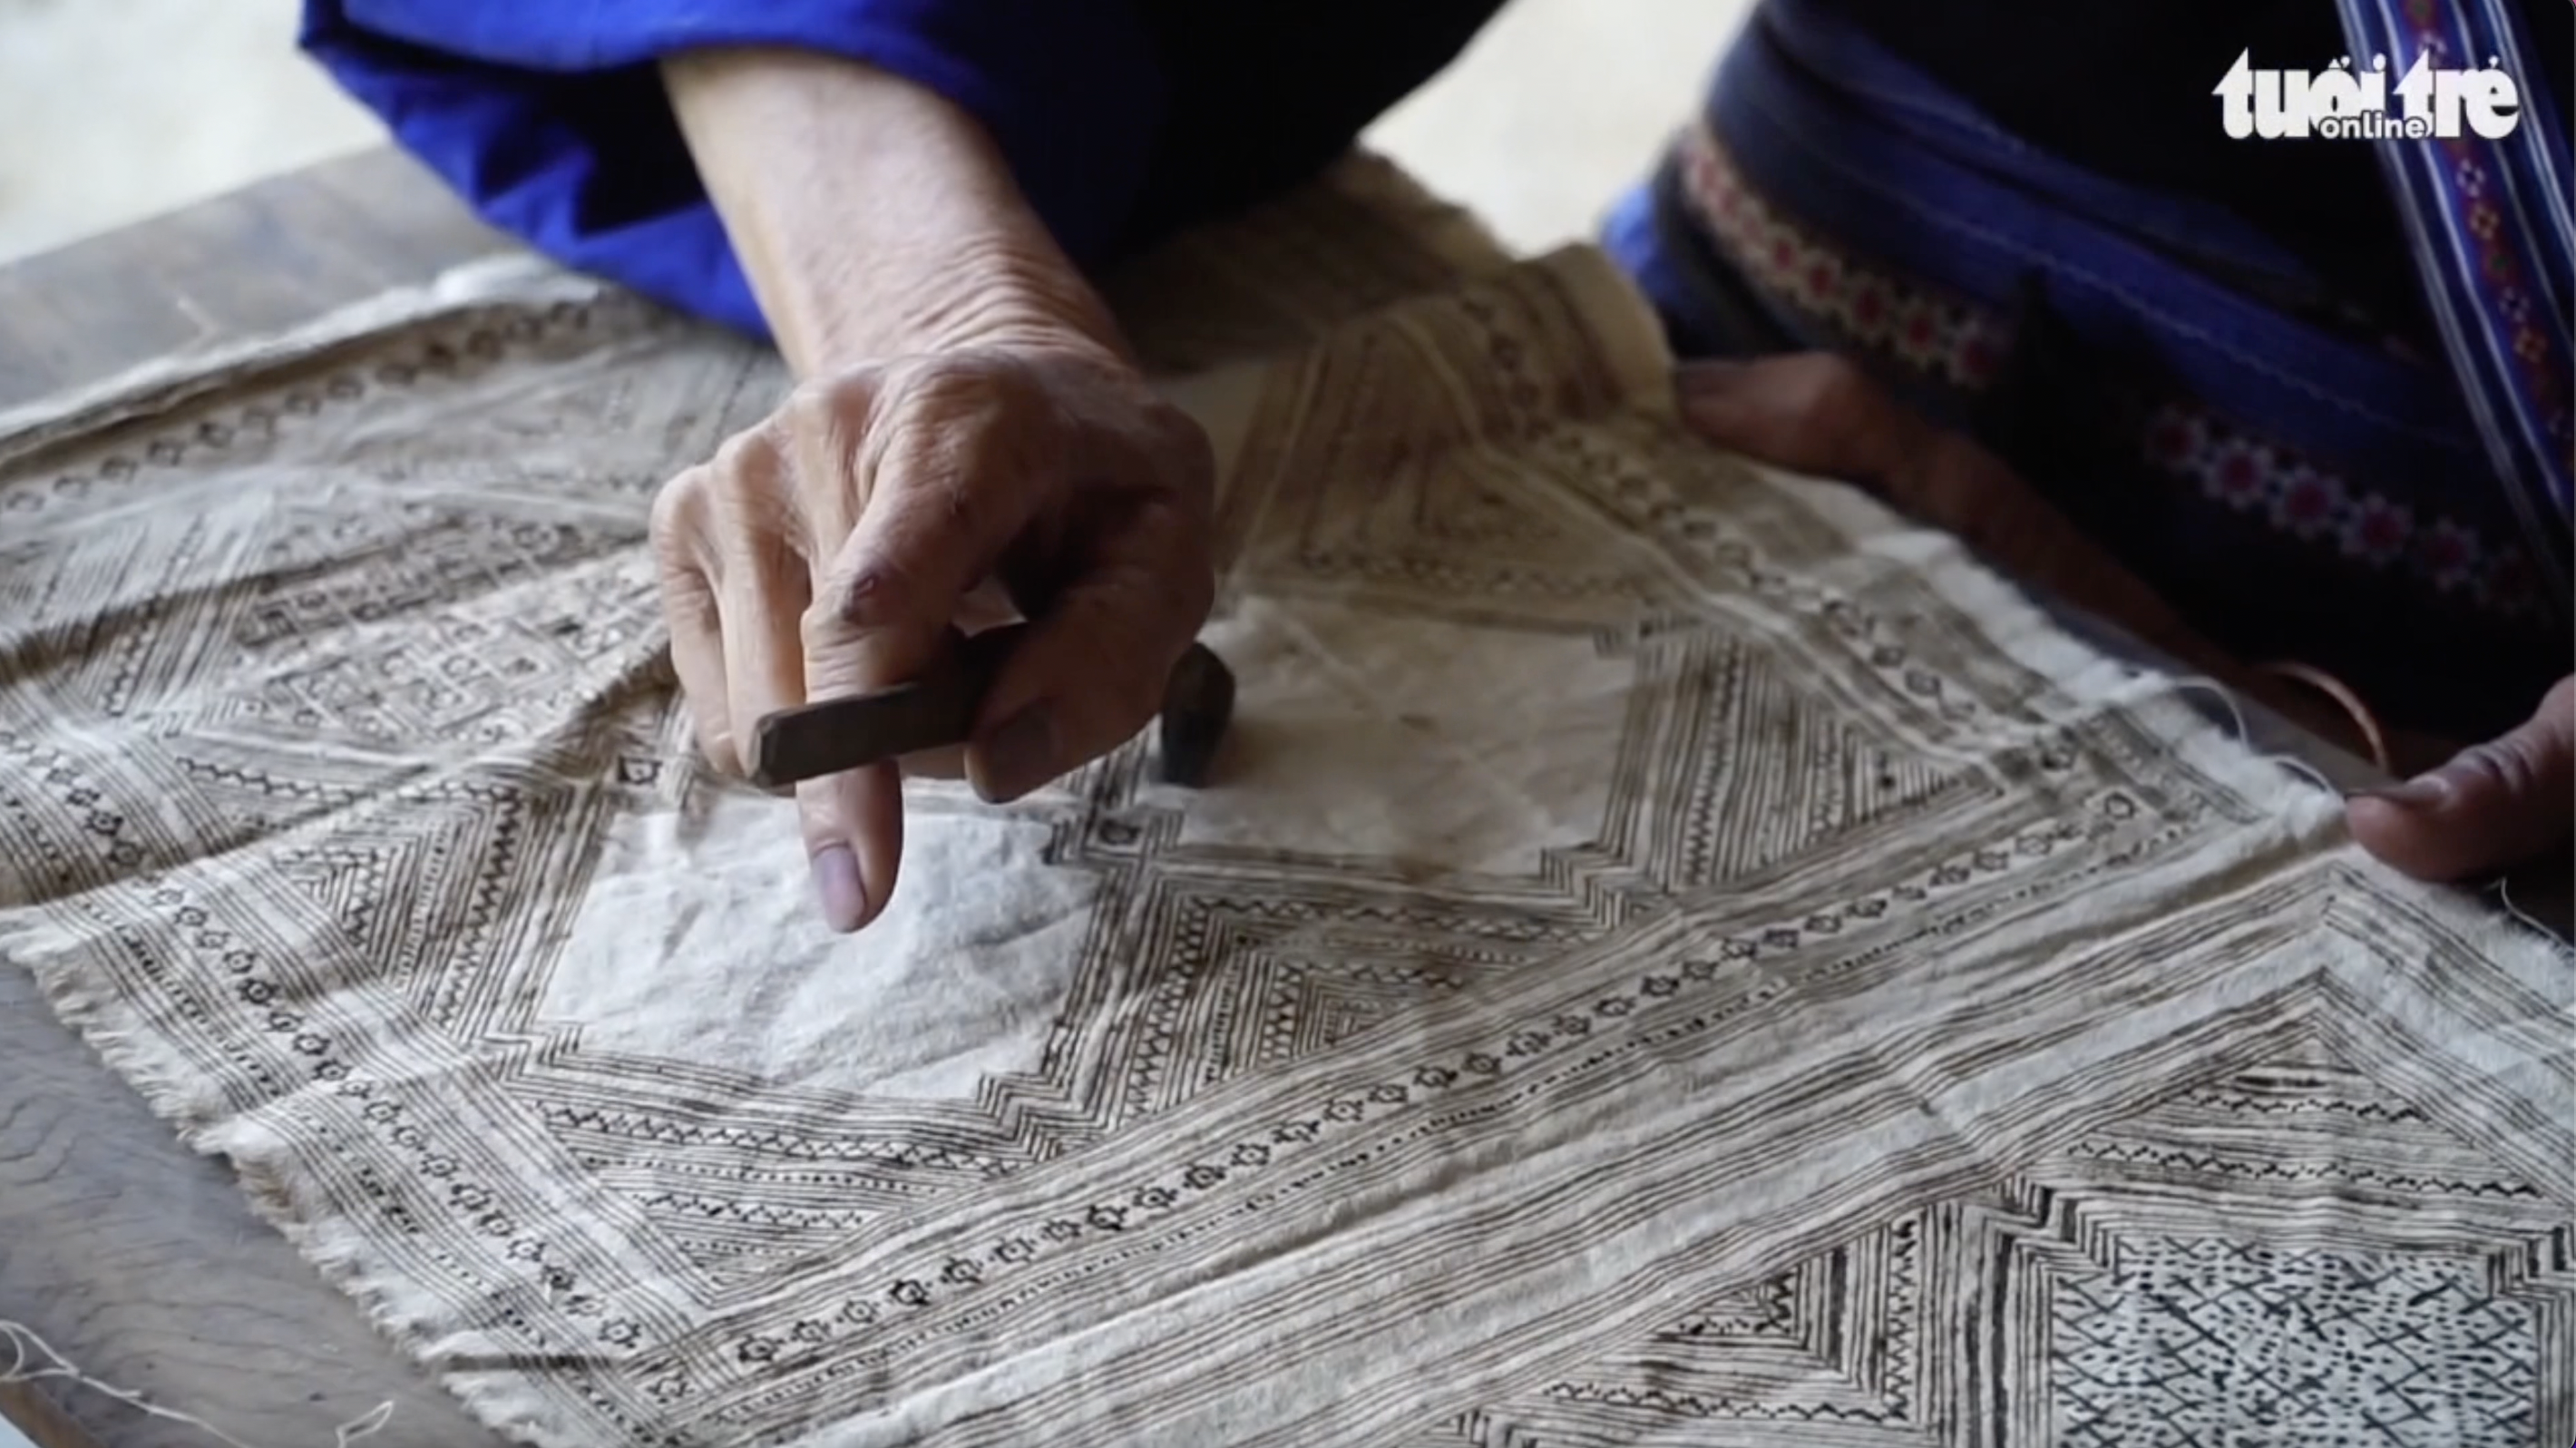 Video of the day: Beeswax drawing – a craft passed down through generations in Mu Cang Chai